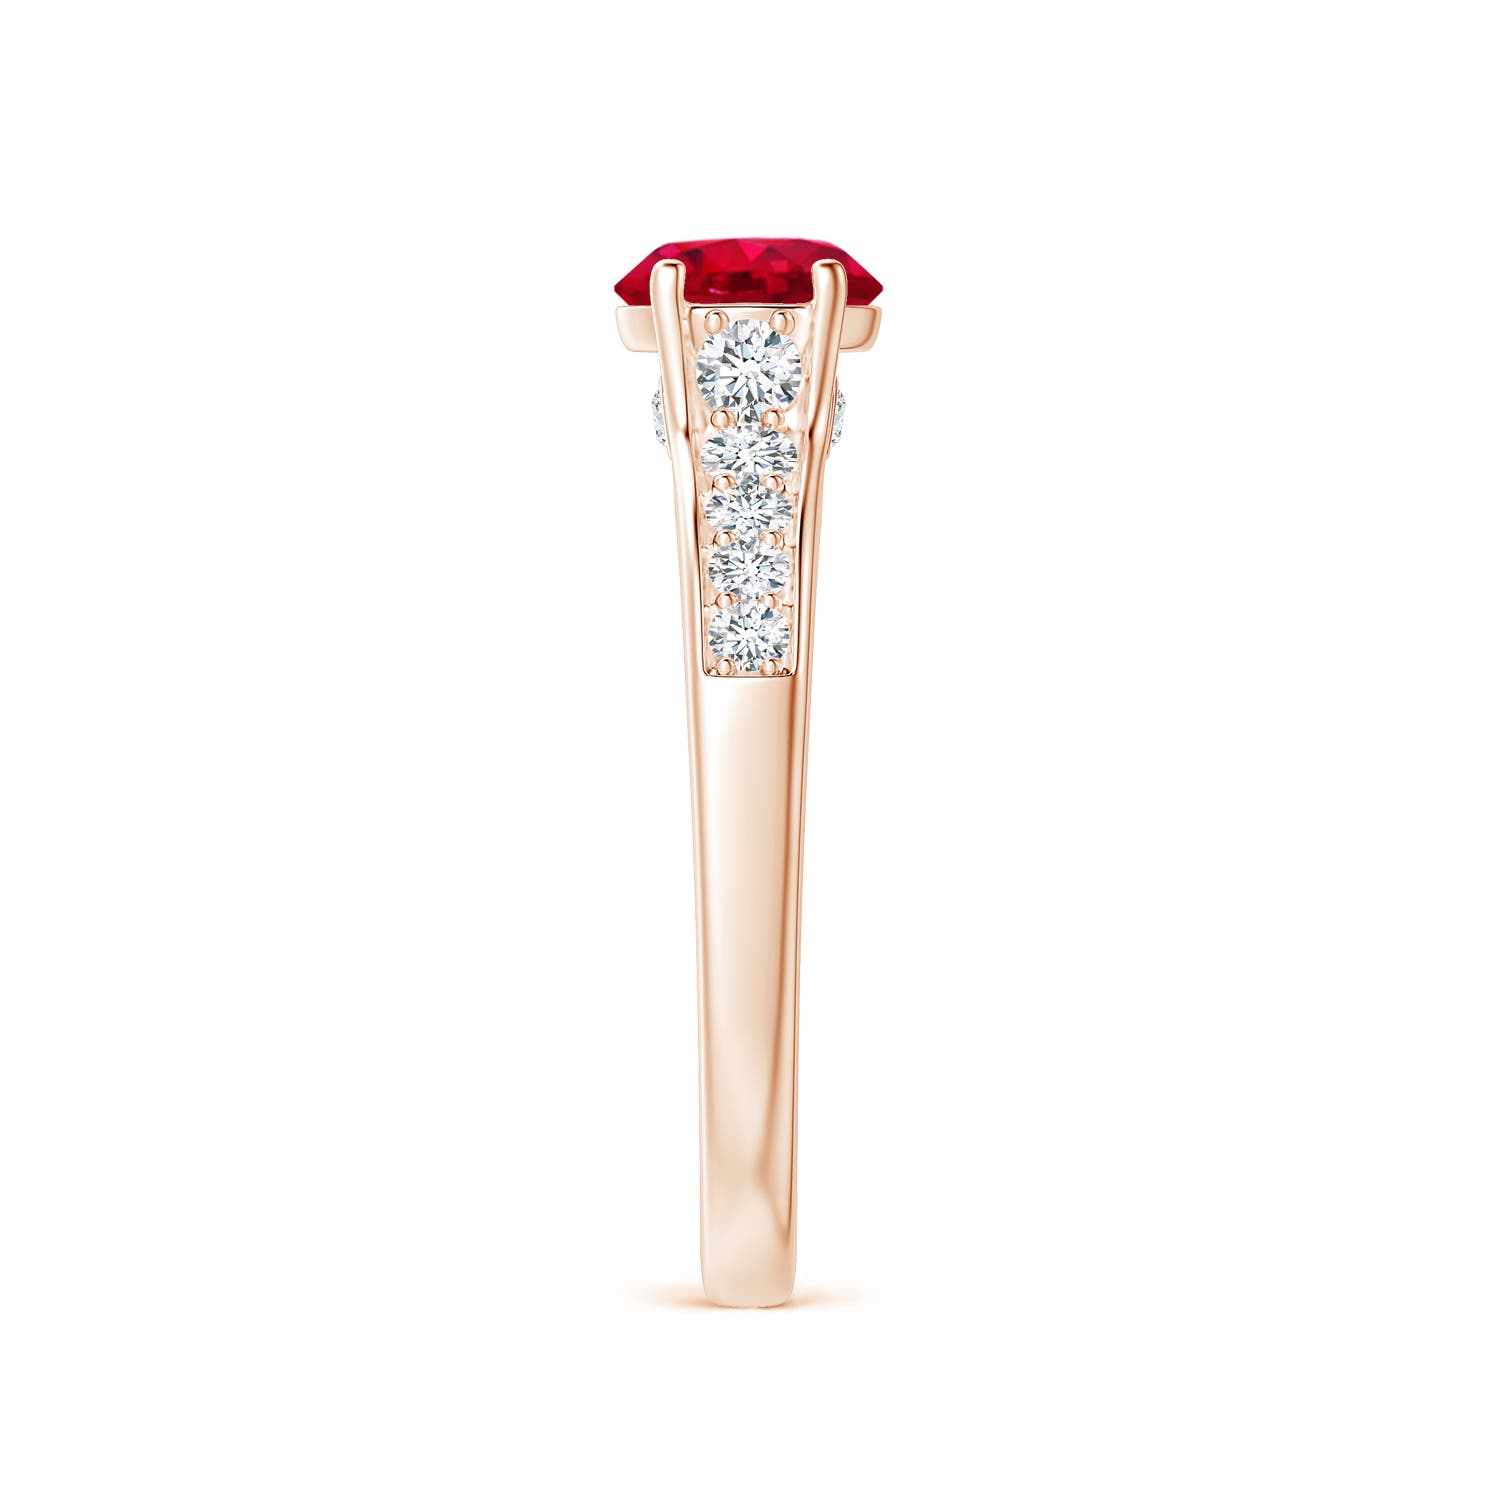 AAA - Ruby / 1.38 CT / 14 KT Rose Gold